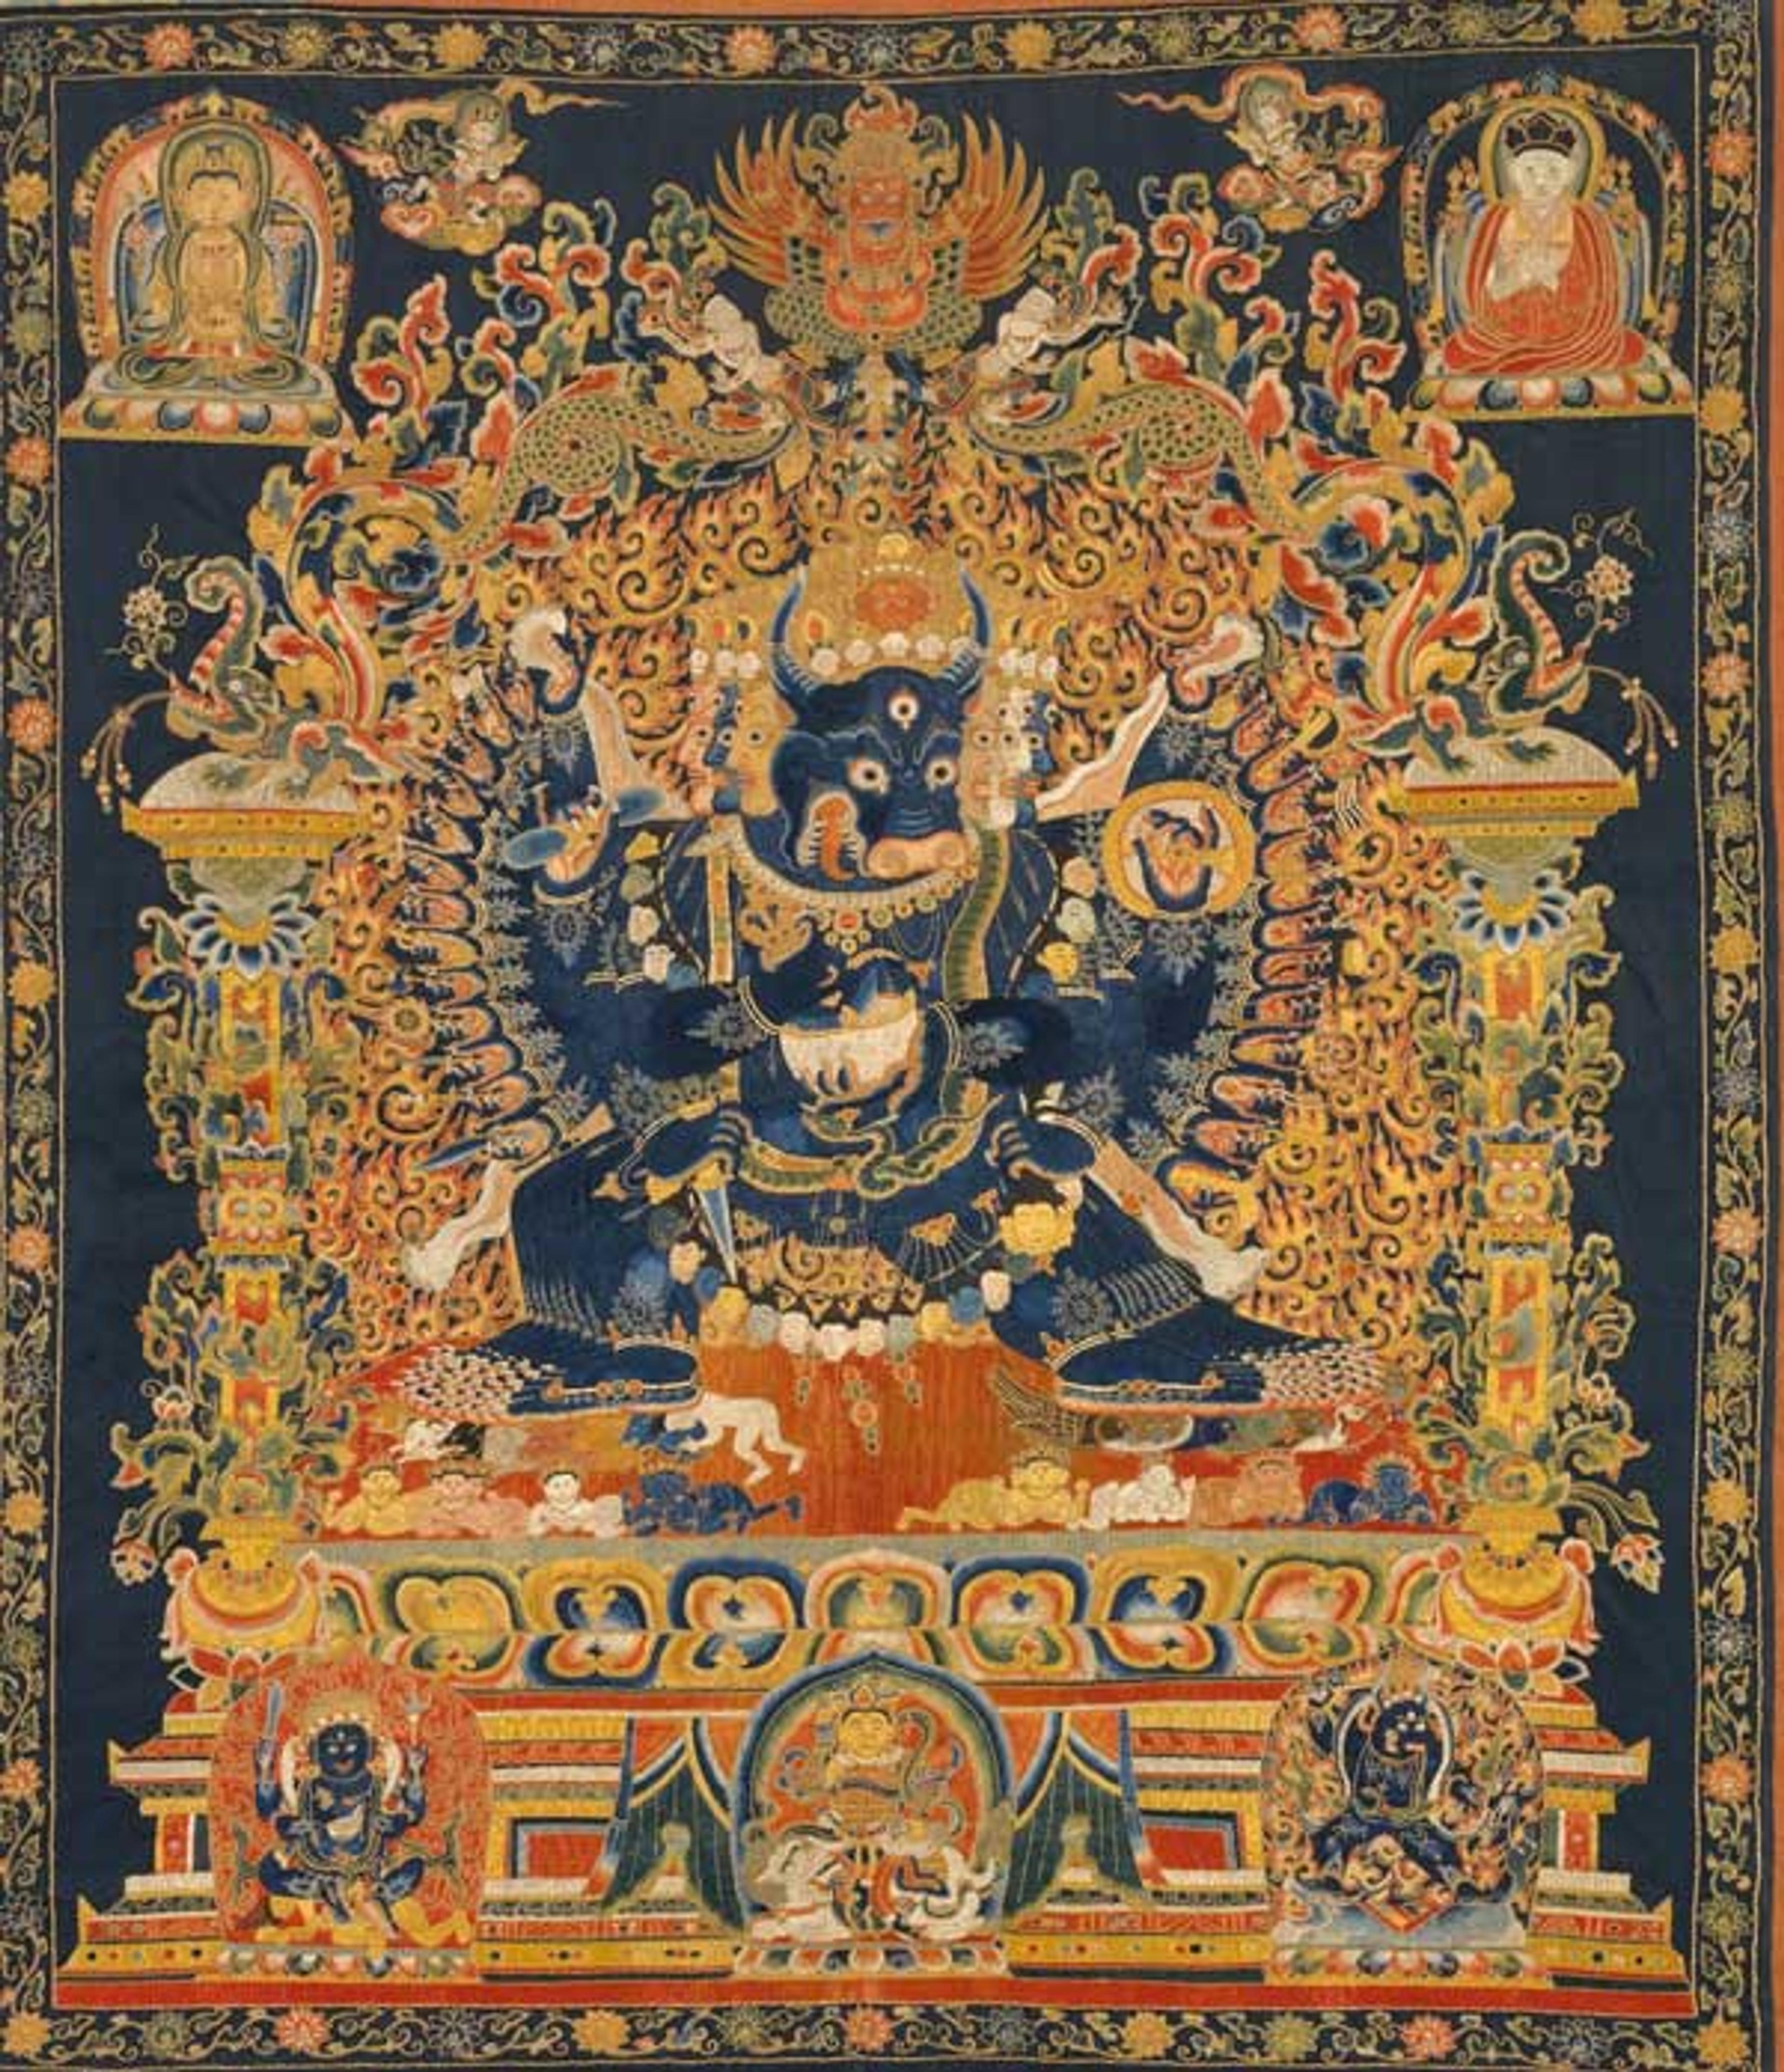 Vajrabhairava, early 15th century. Ming dynasty (1368–1644). China. Embroidery in silk, metallic thread, and horsehair on silk satin; 57 1/2 x 30 in. (146.1 x 76.2 cm). The Metropolitan Museum of Art, New York, Purchase, Lila Acheson Wallace Gift, 1993 (1993.15)